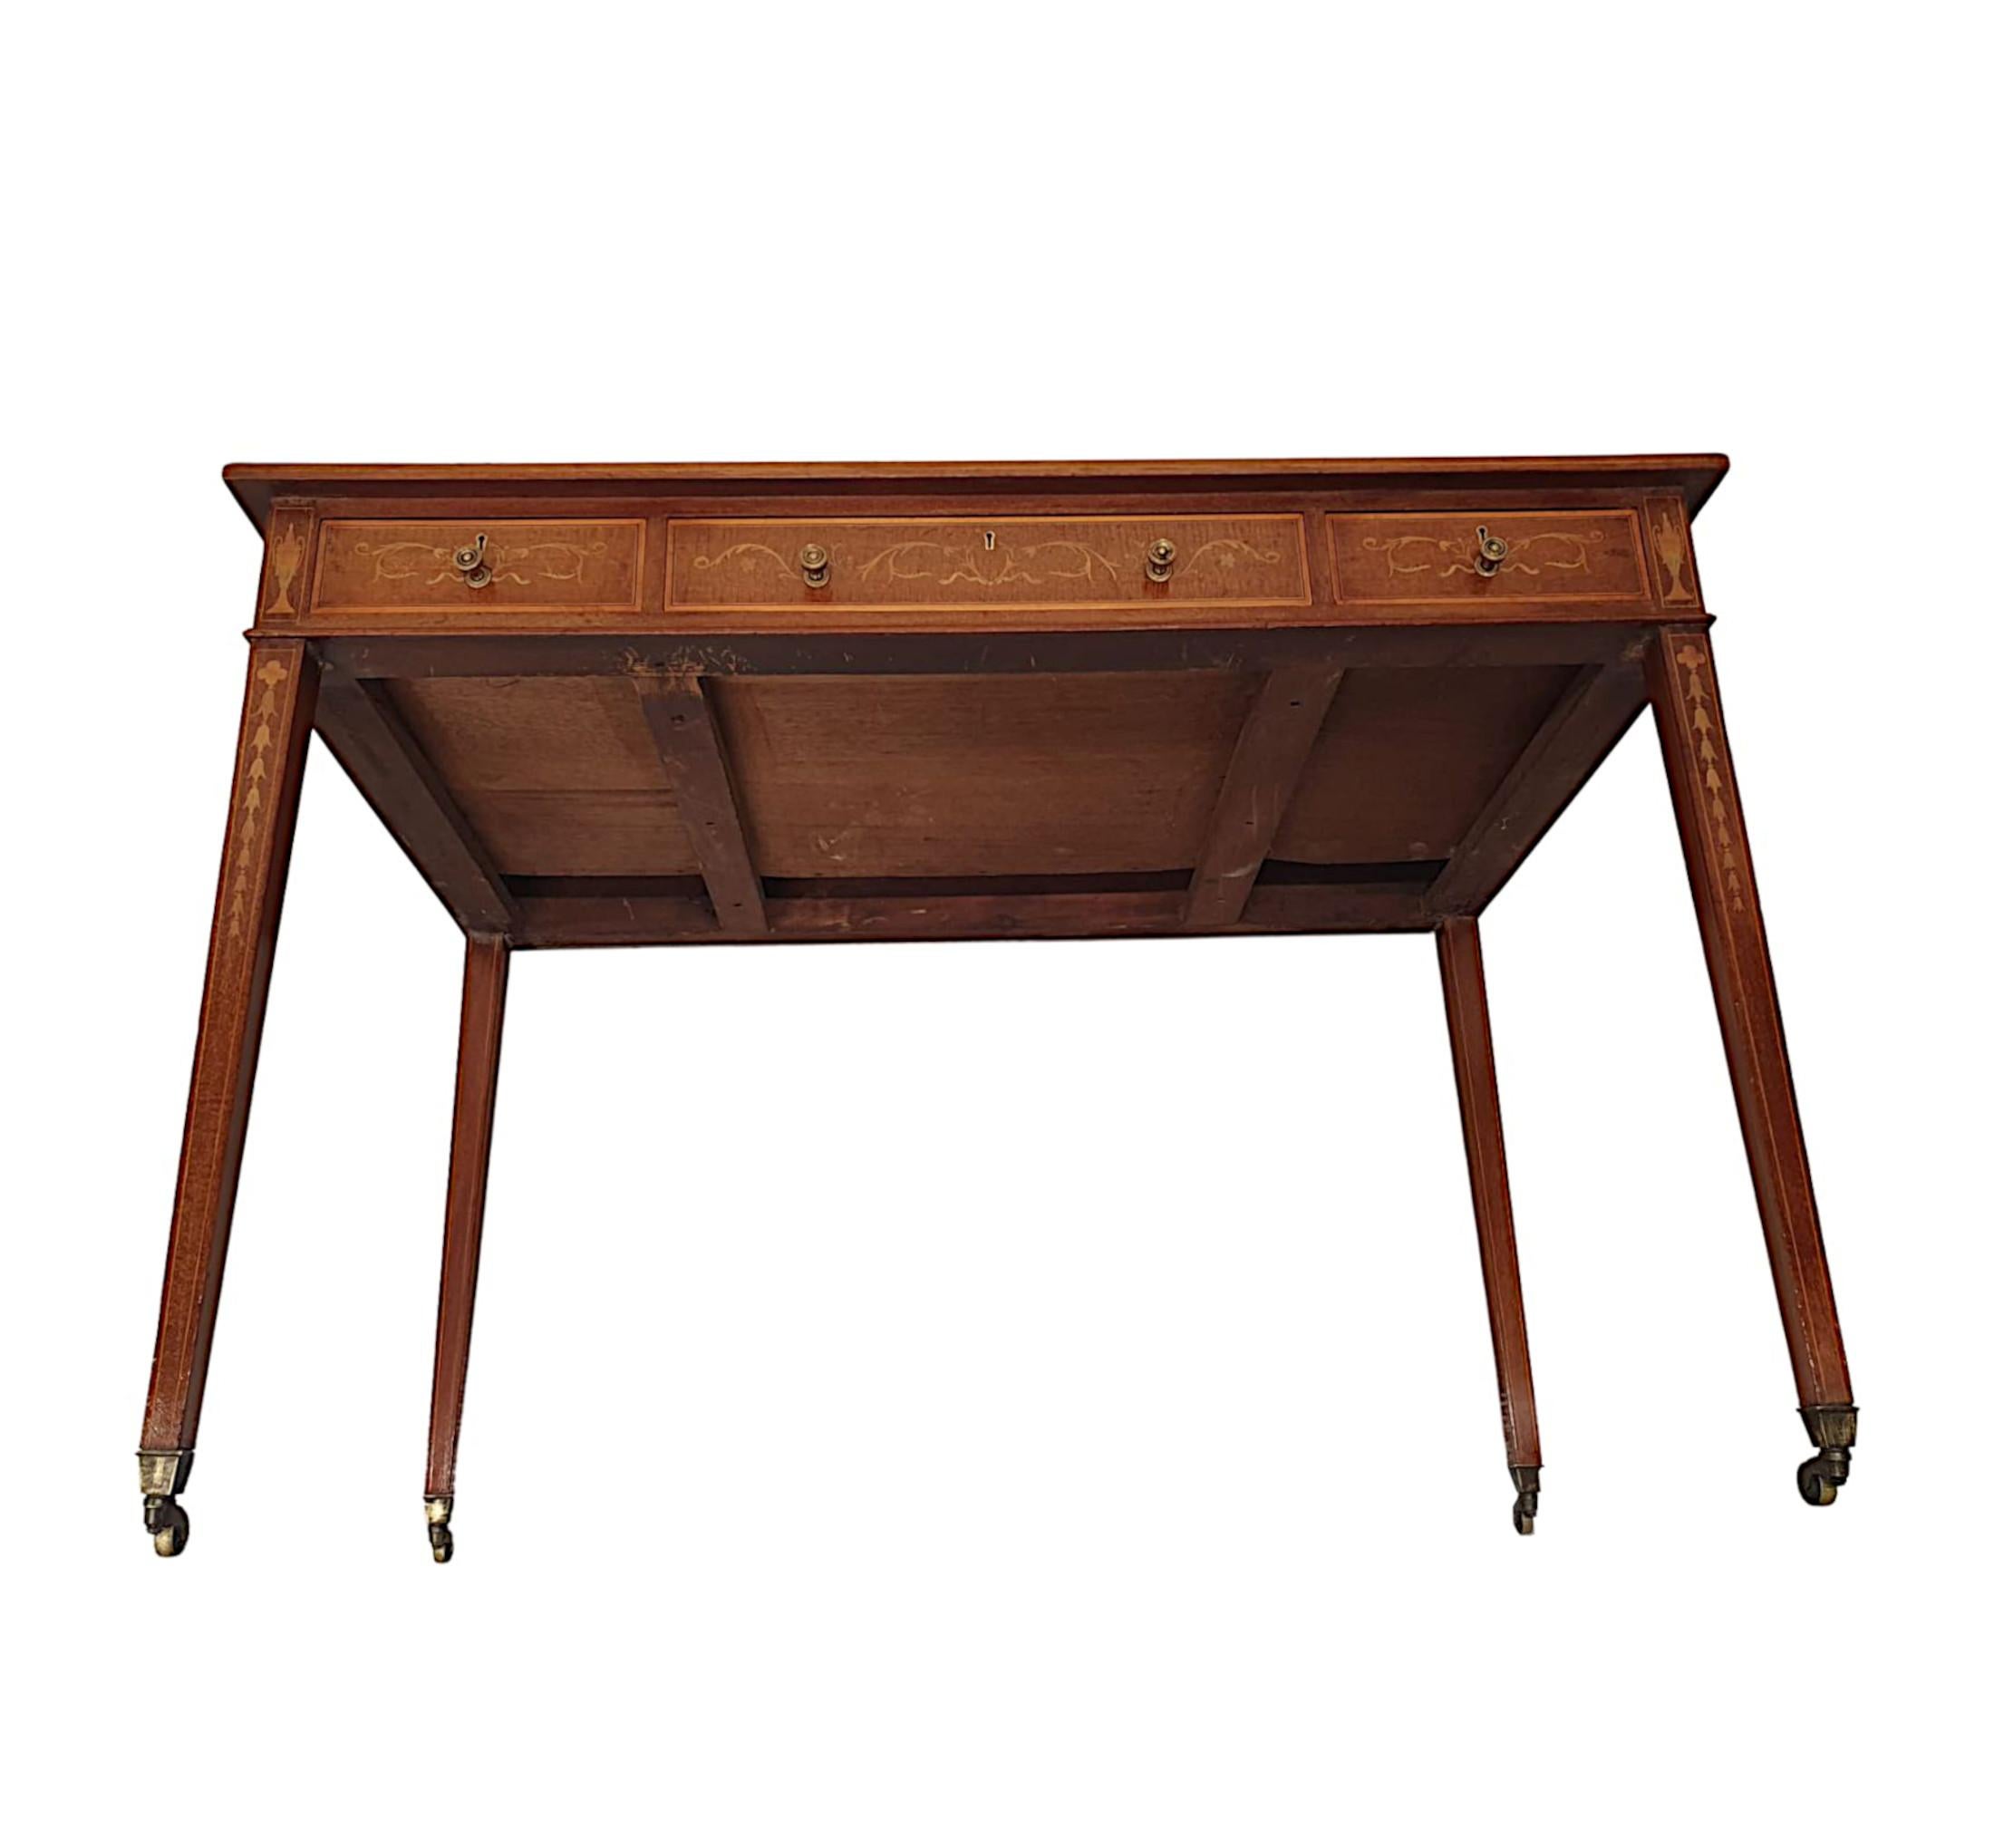 Very Fine Edwardian Desk Attributed to Edward and Roberts For Sale 3